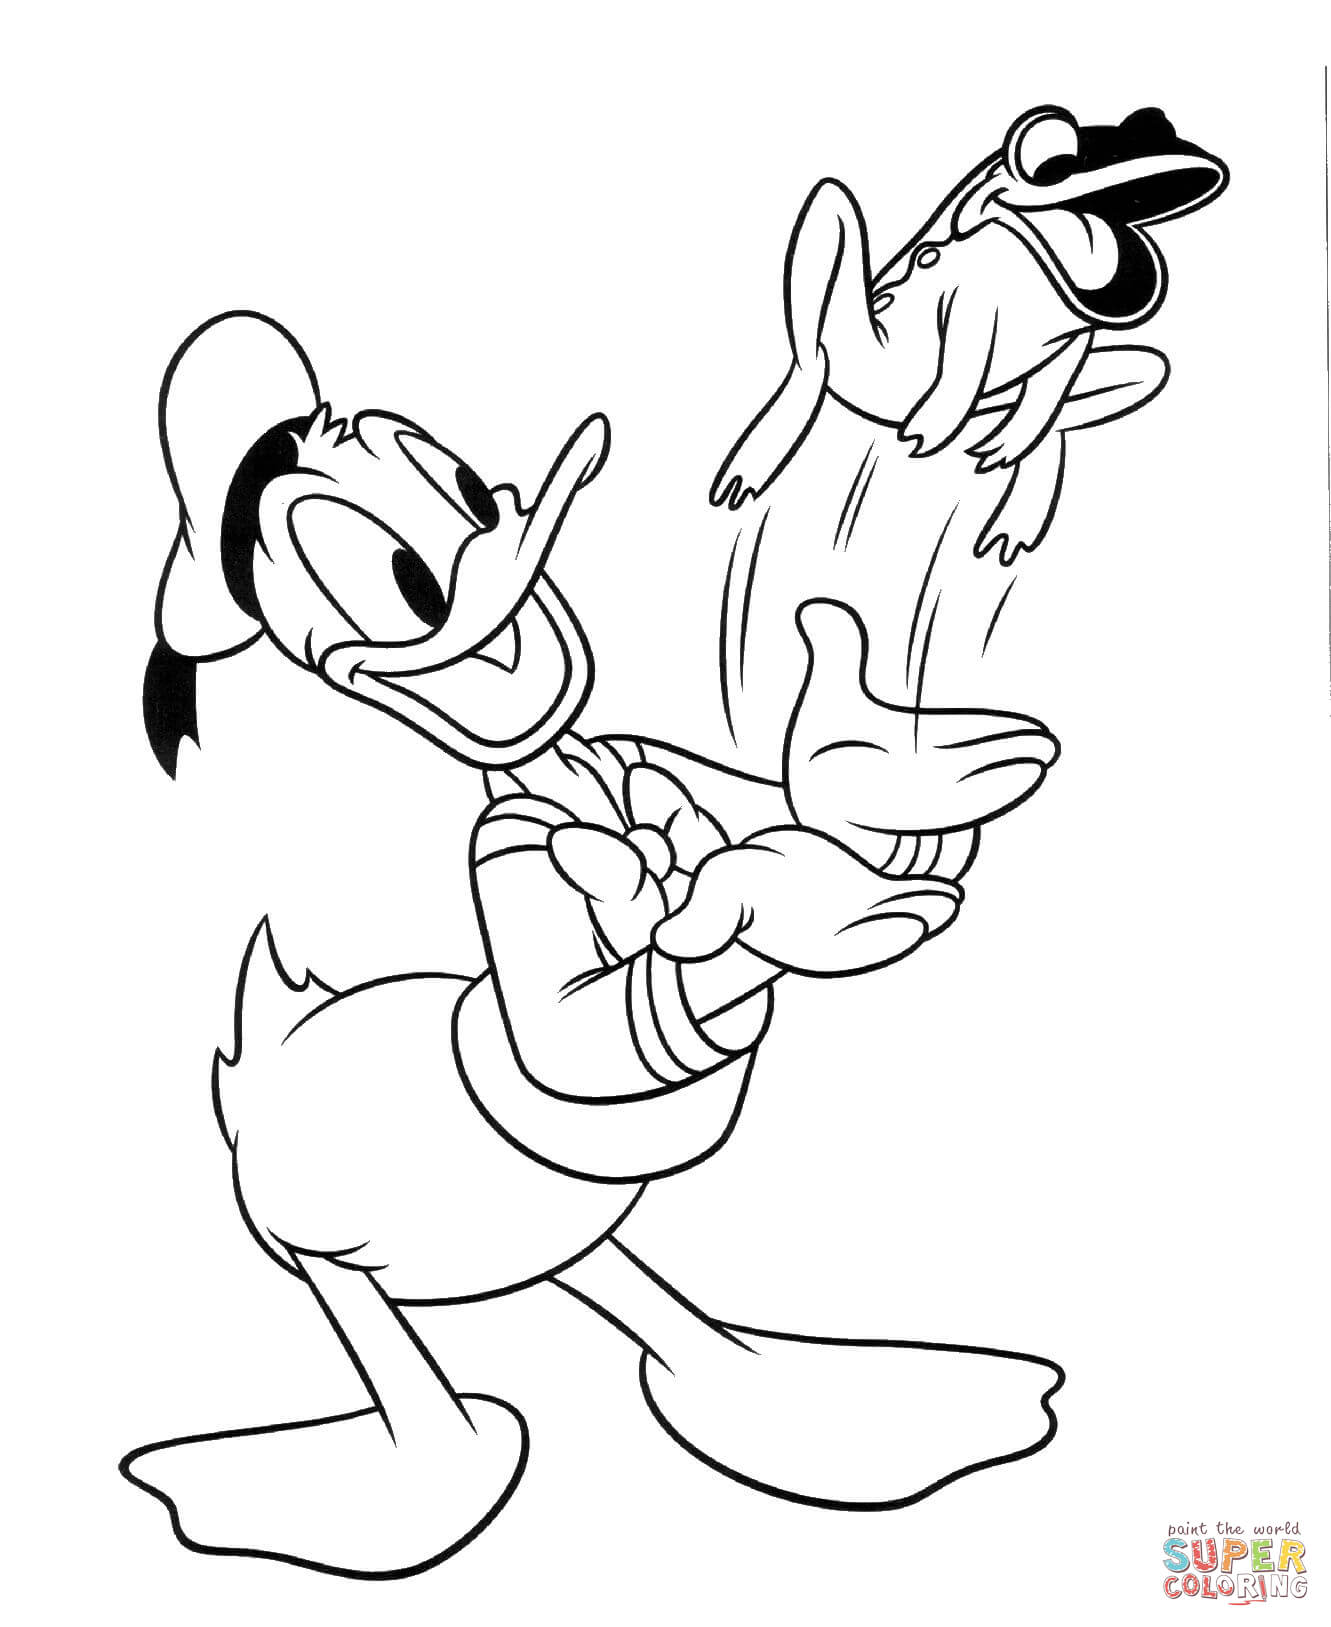 Drawing Donald Duck #30161 (Cartoons) – Printable coloring pages